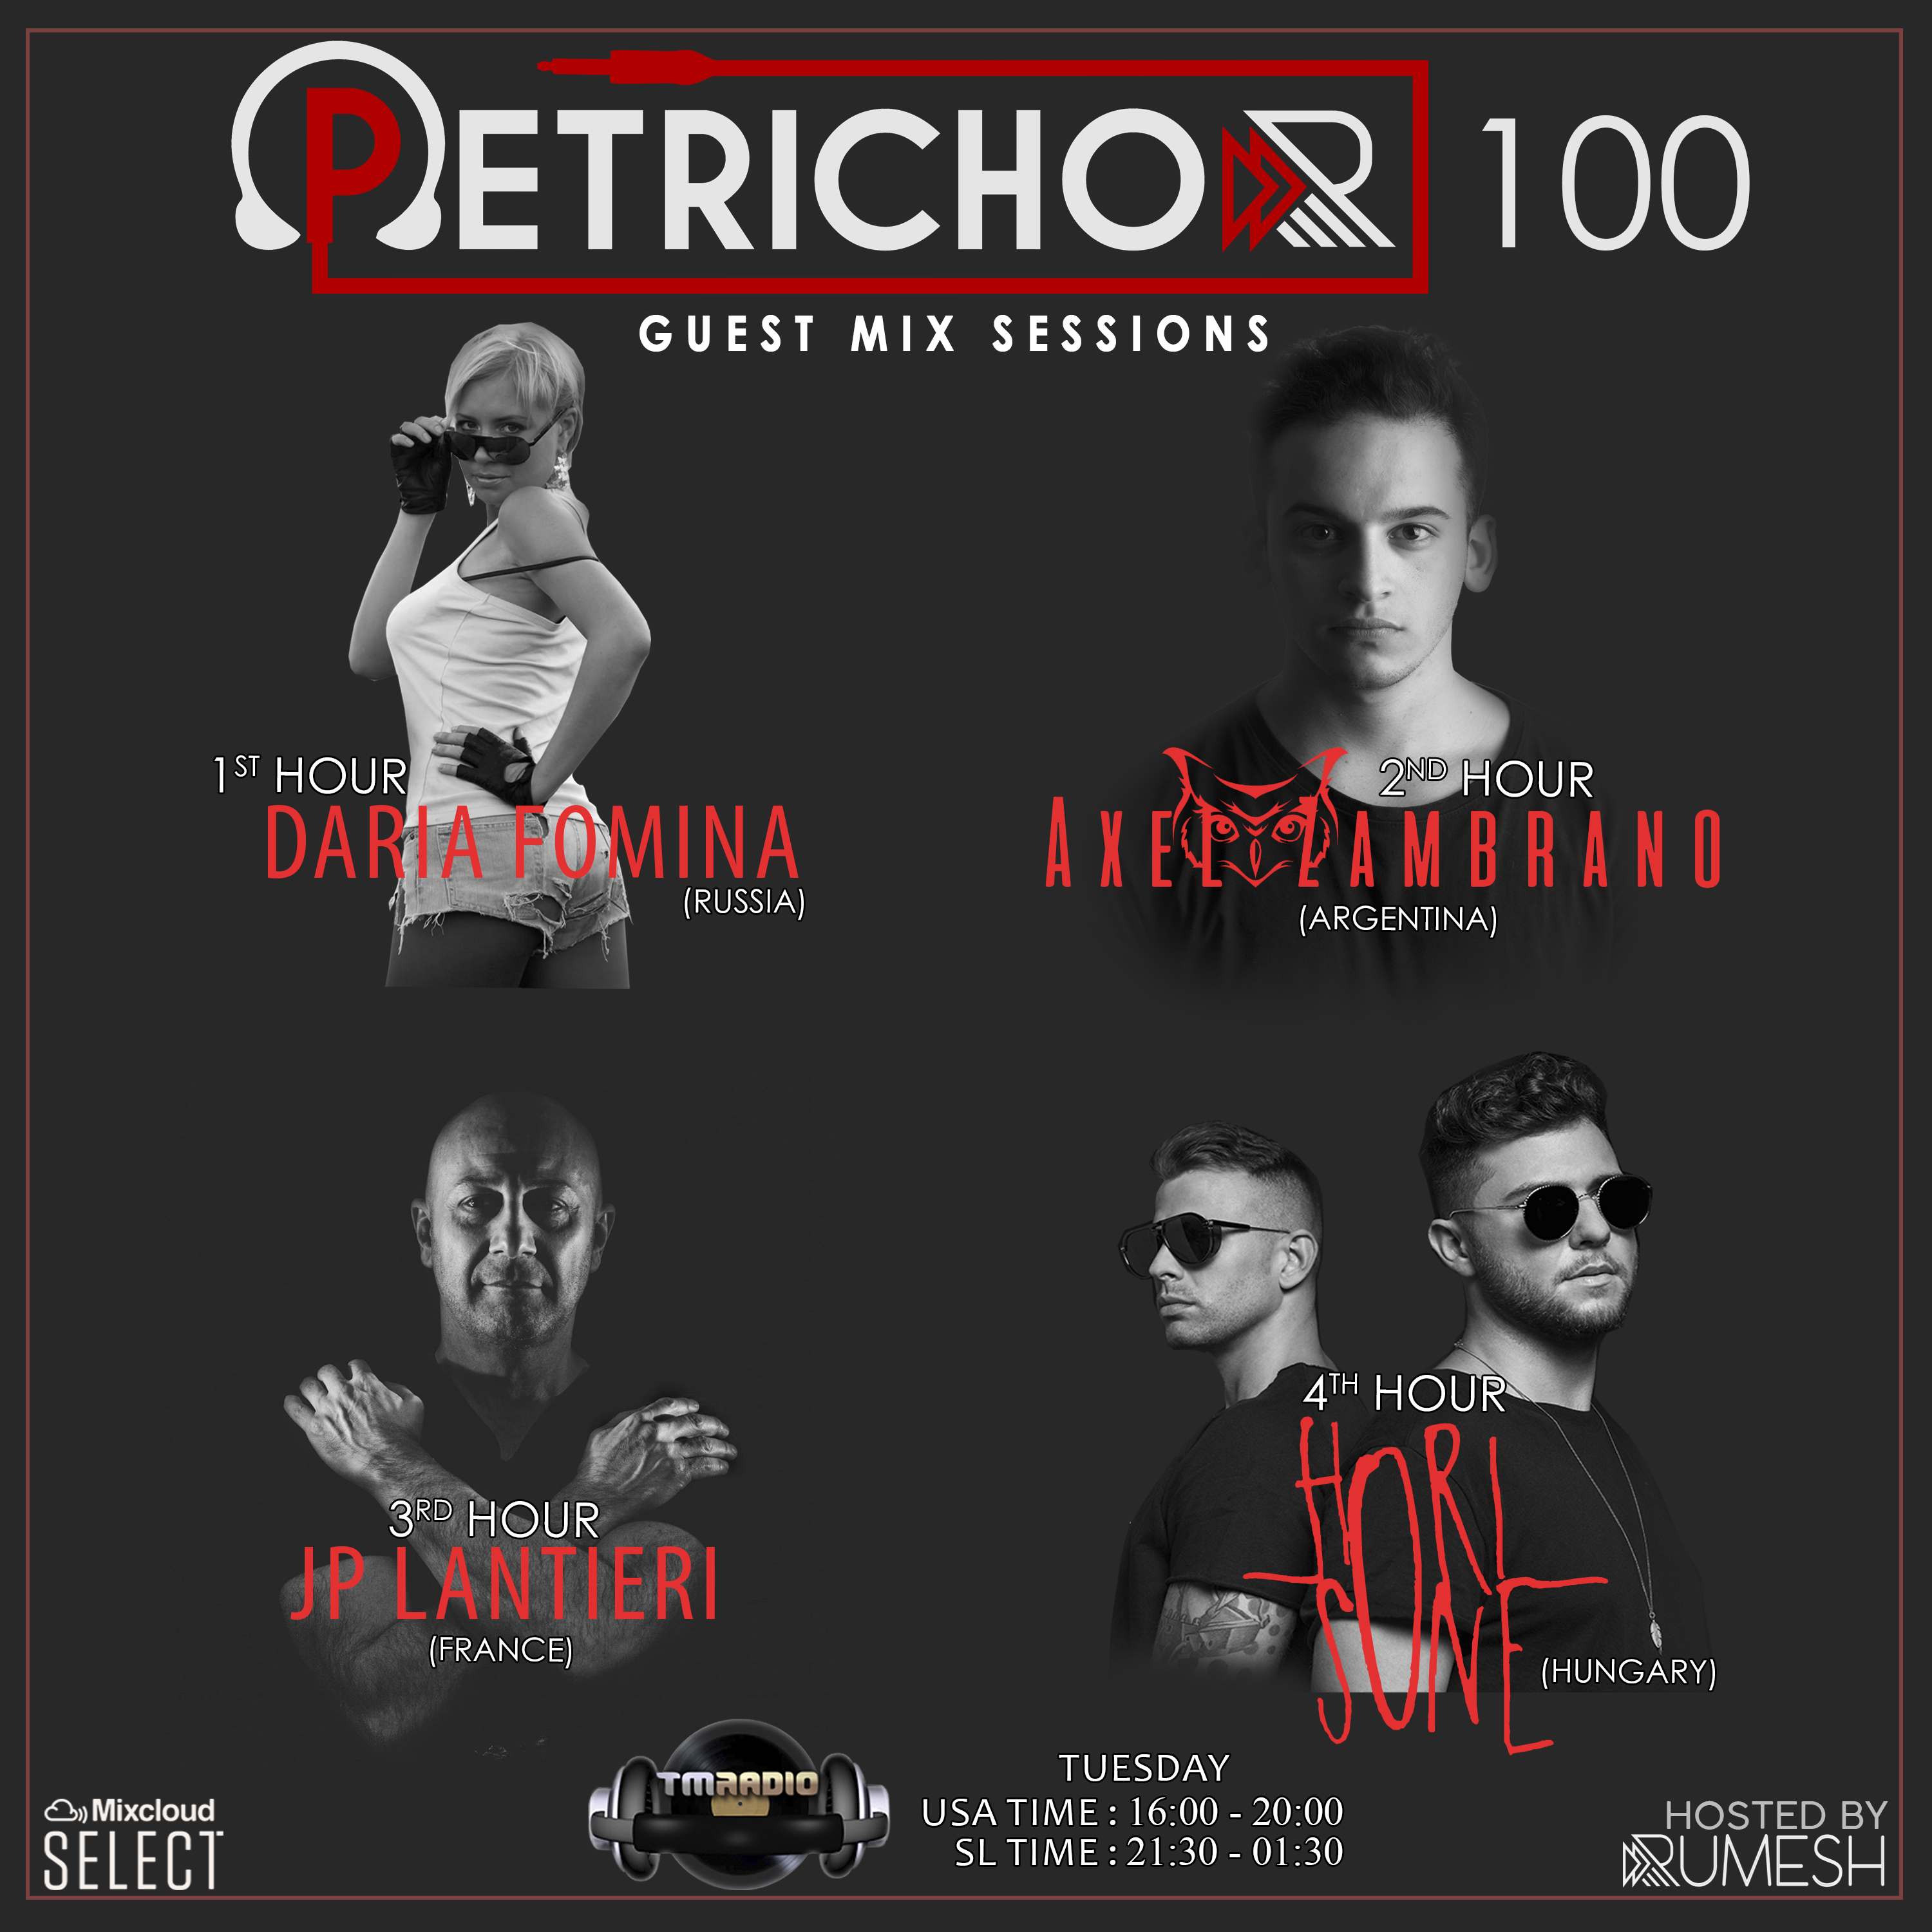 Petrichor 100 Guest Mix Sessions by |Daria Fomina| |Axel Zambrano| |JP Lantieri| |Horisone| (from February 16th, 2021)